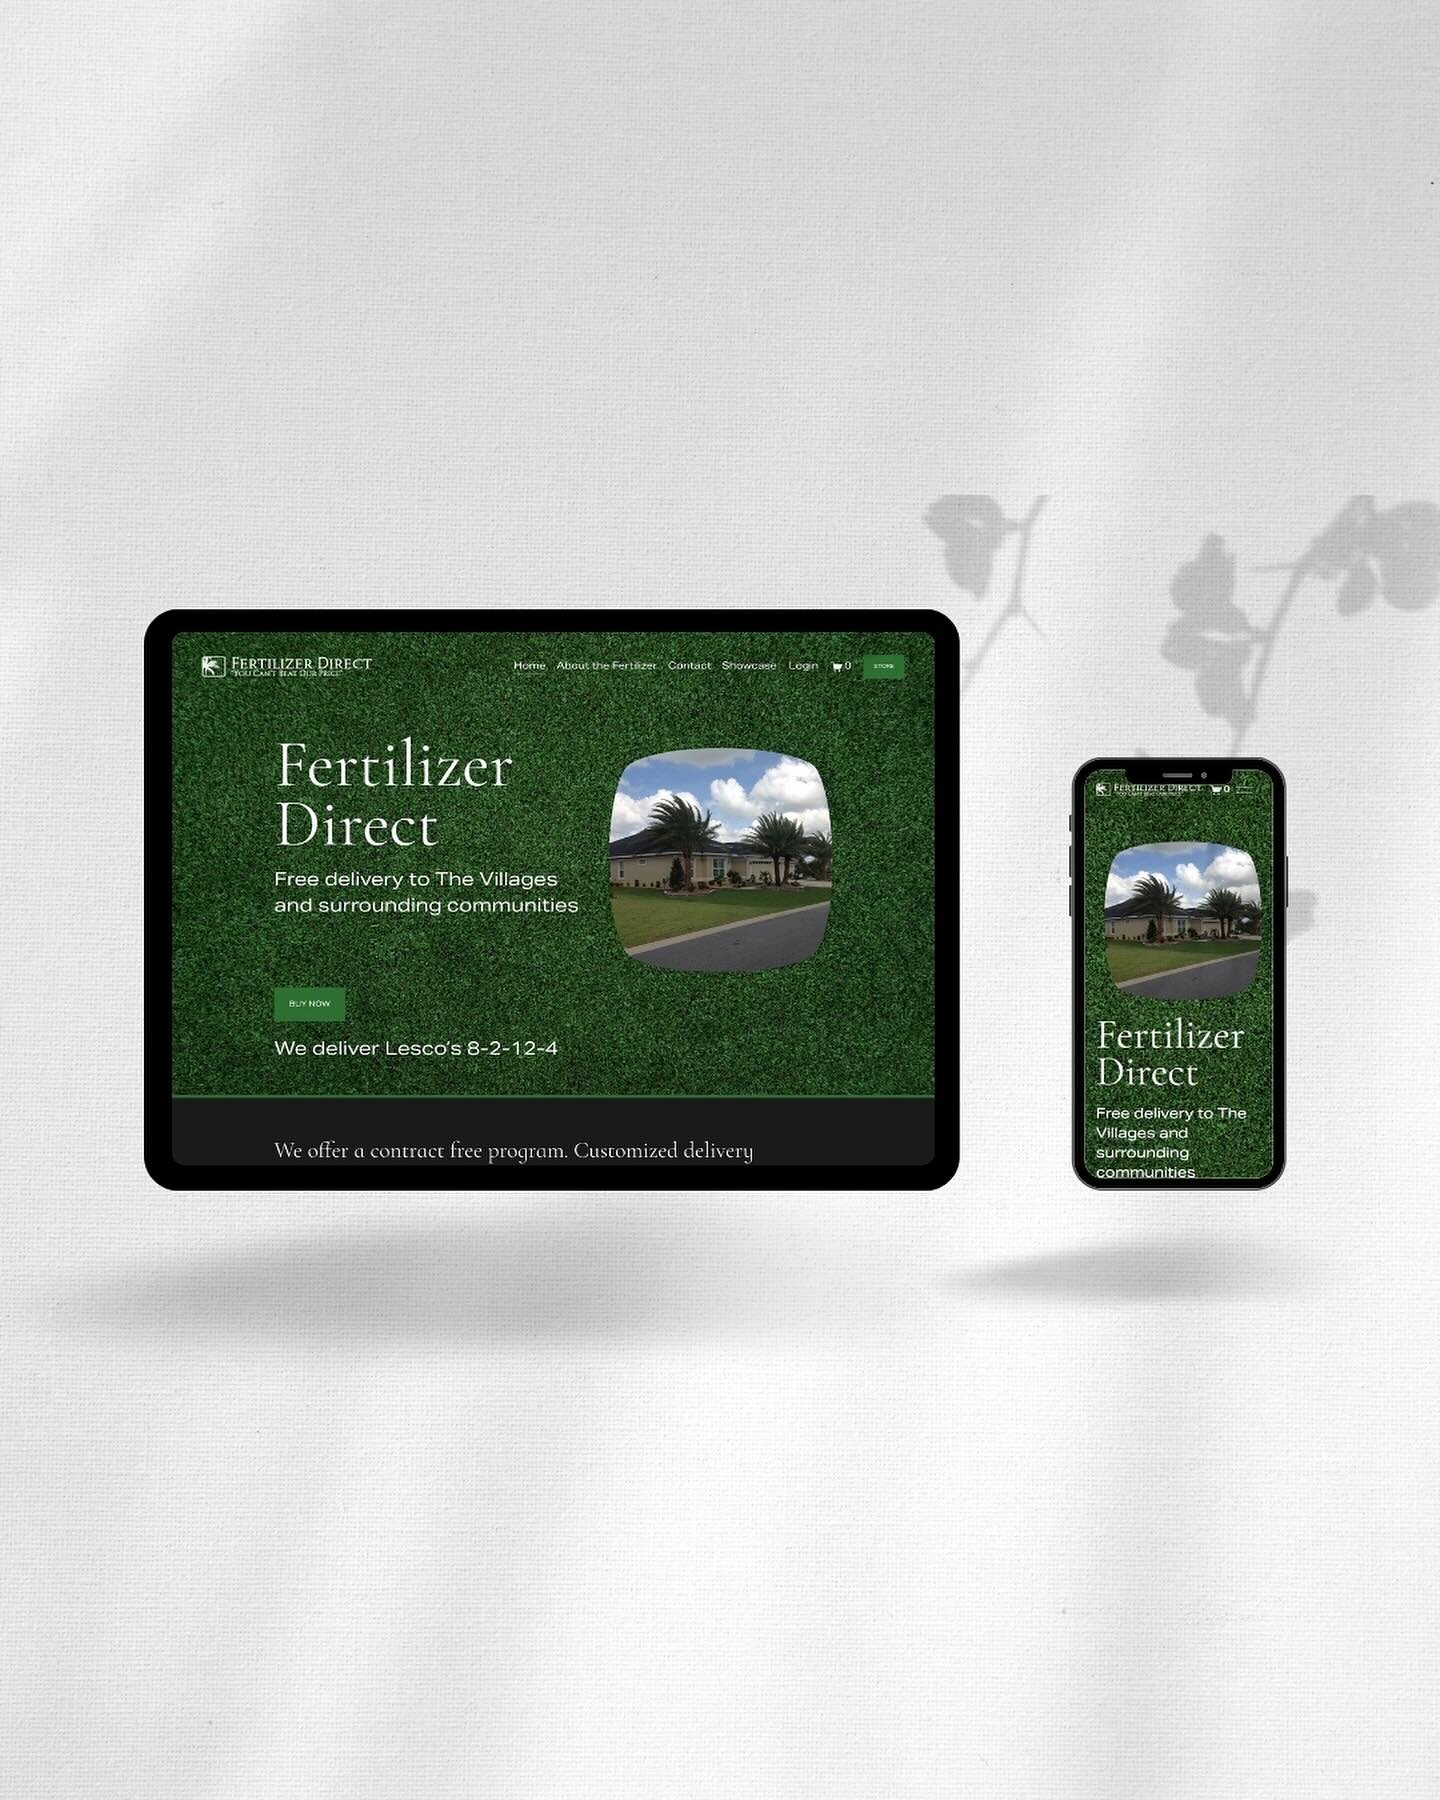 Brand new website launched! We specialize in small business and nonprofit sites that are sleek, beautiful, and functional. www.fertilizerdirectfl.com